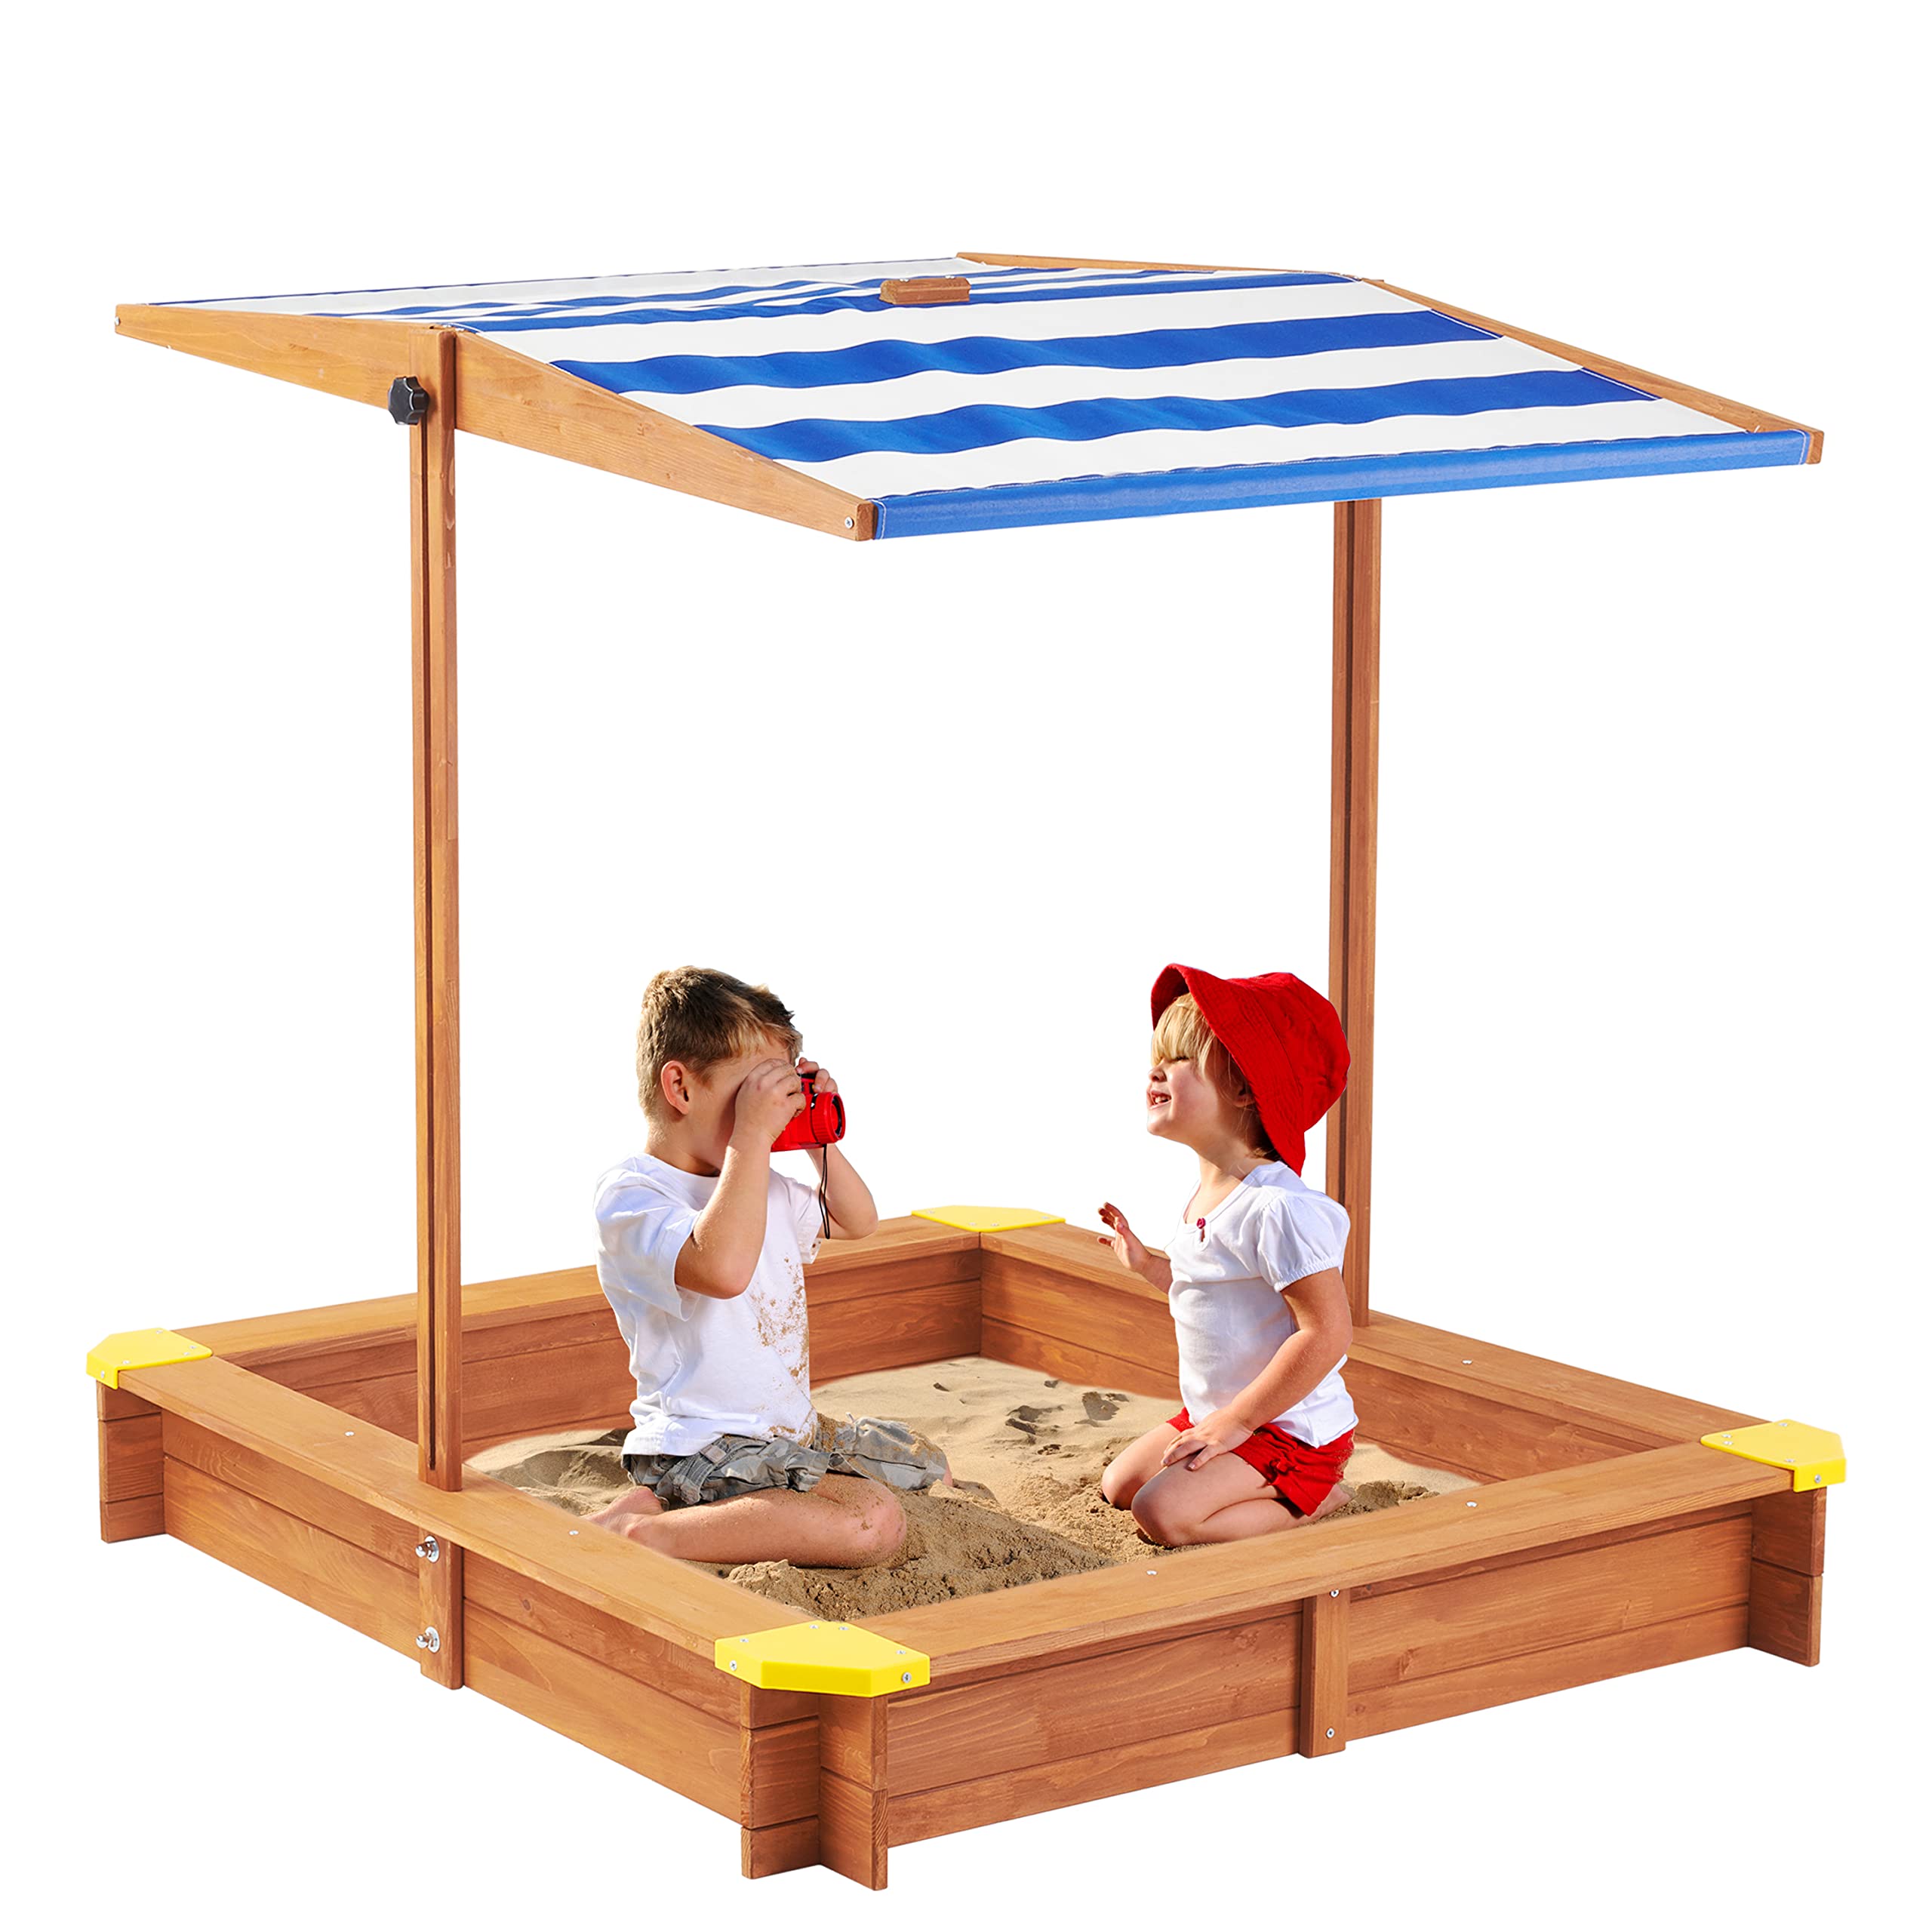 Kid's Sandbox with Cover, 46''x46'' Outdoor Wooden Sandpit w/Adjustable Canopy for Backyard Play